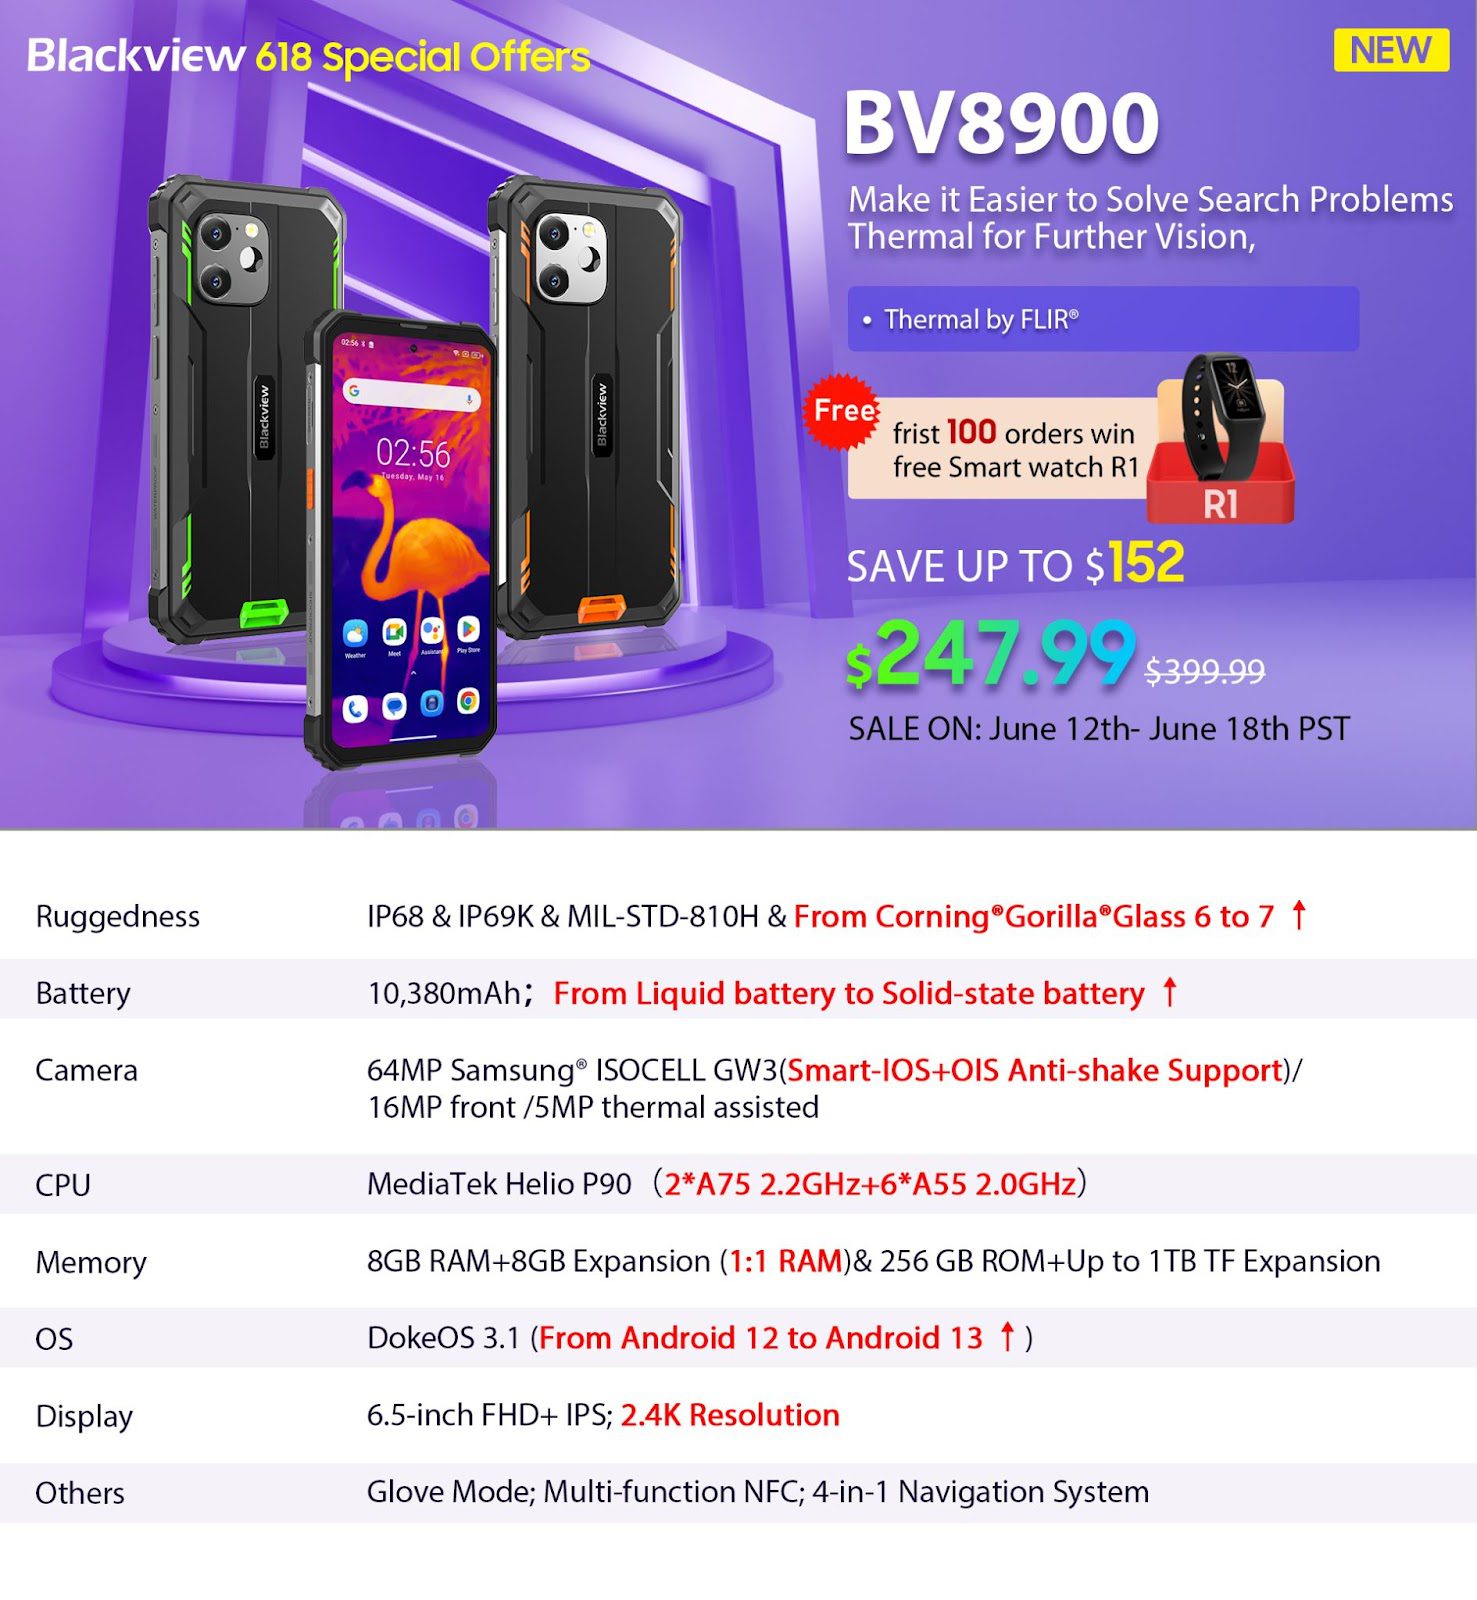 Save Up to $238.51! Blackview 618 Shopping Festival from June 12th to 18th PST